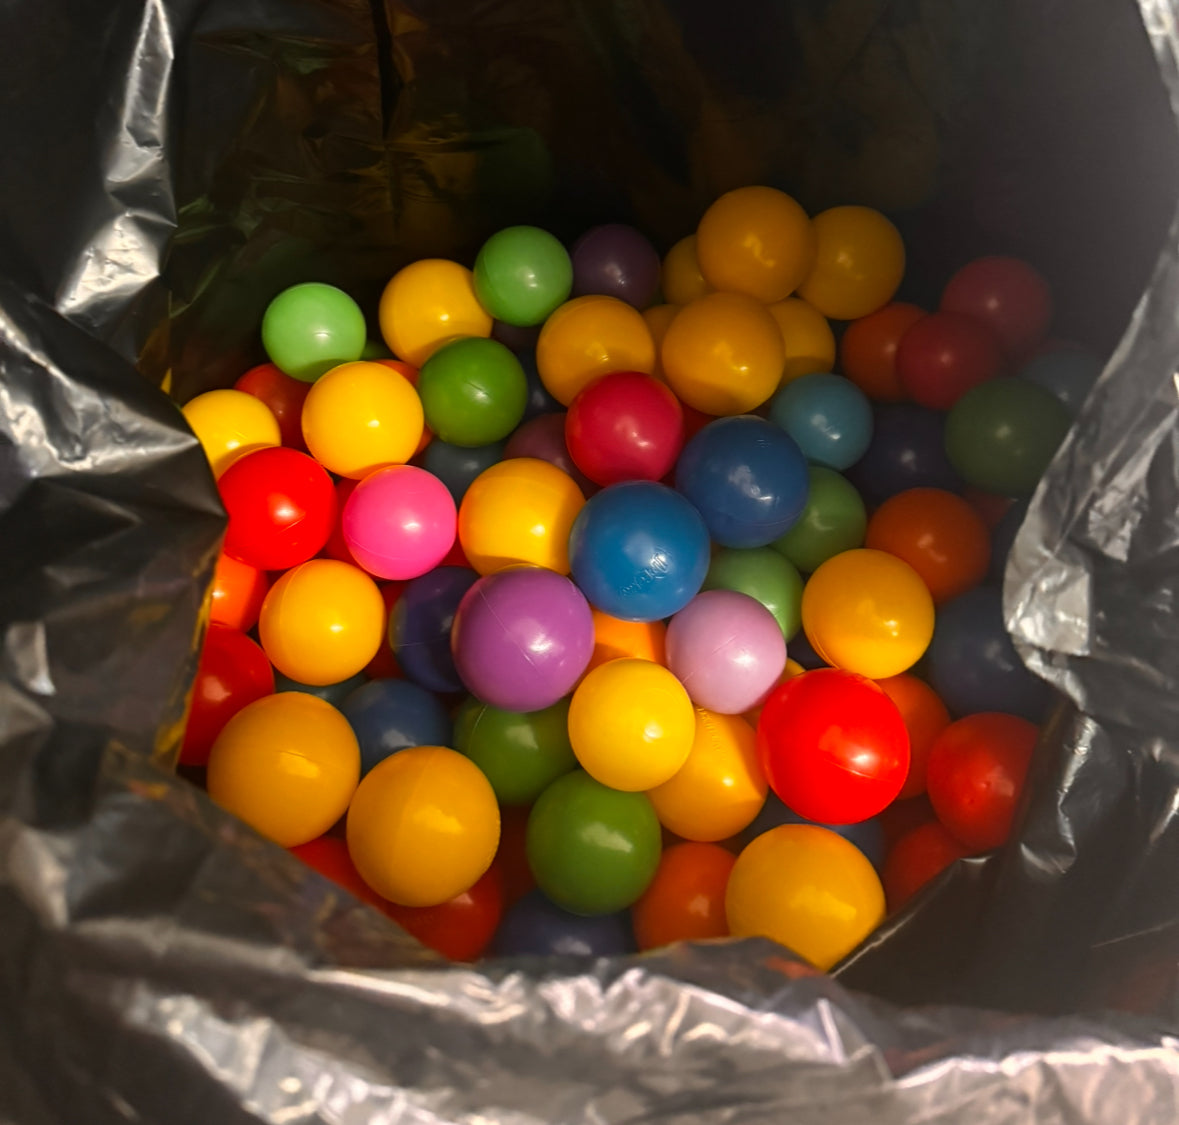 Ball Pit Balls - large garbage bag GUC - see picture for scale